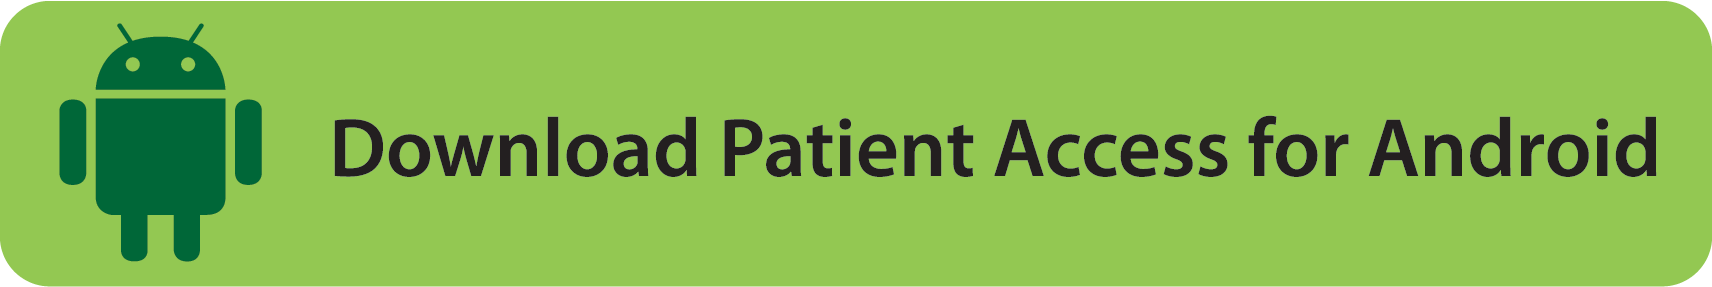 Download patient access for android